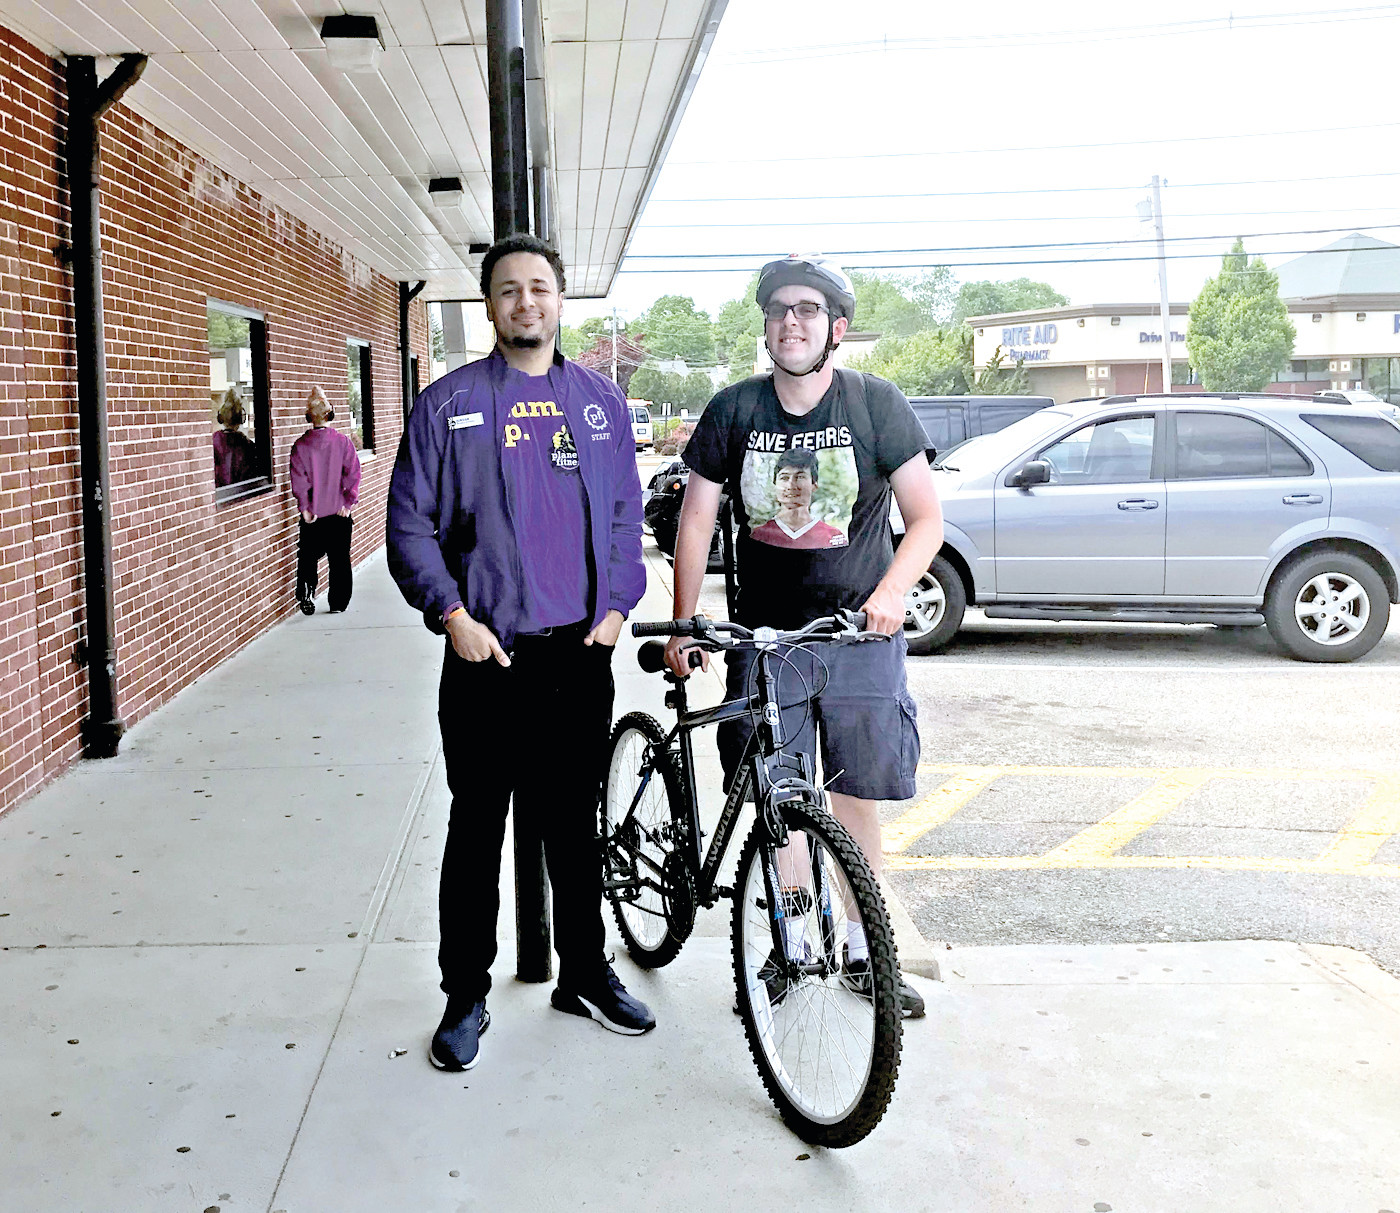 Planet Fitness gifts bike to member in need